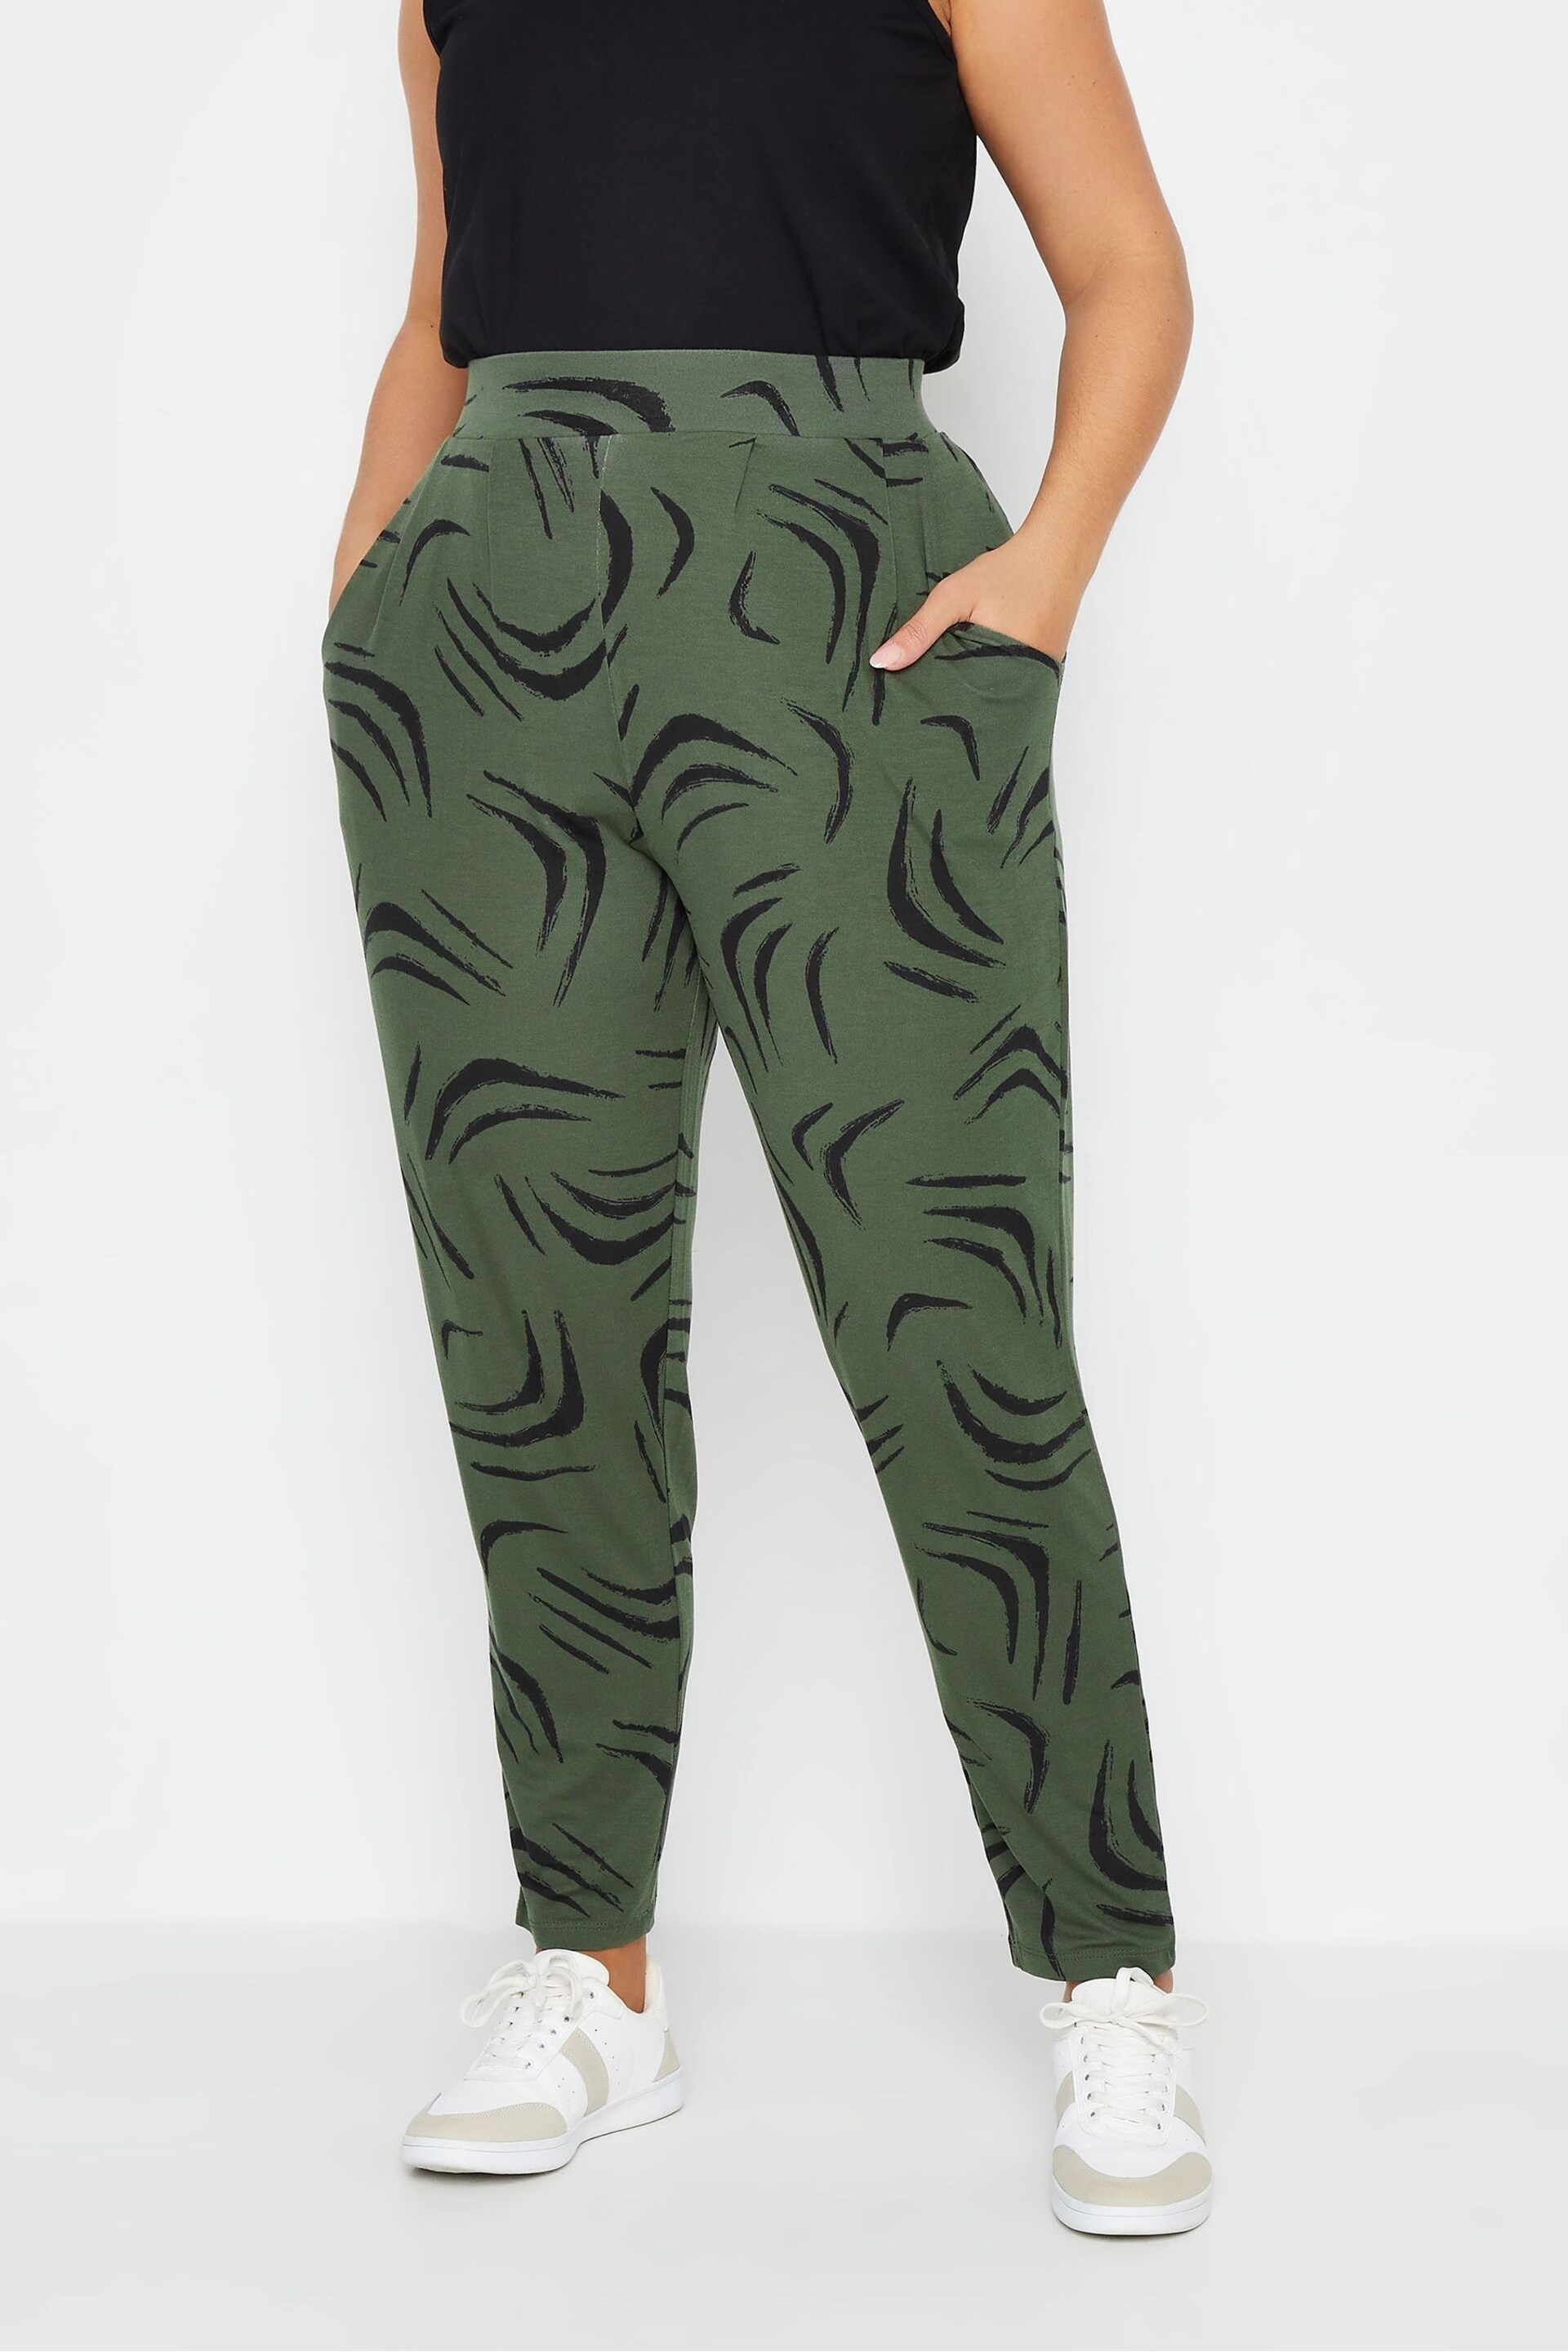 Yours Curve Khaki Green Double Pleated Harem Trousers - Image 1 of 4